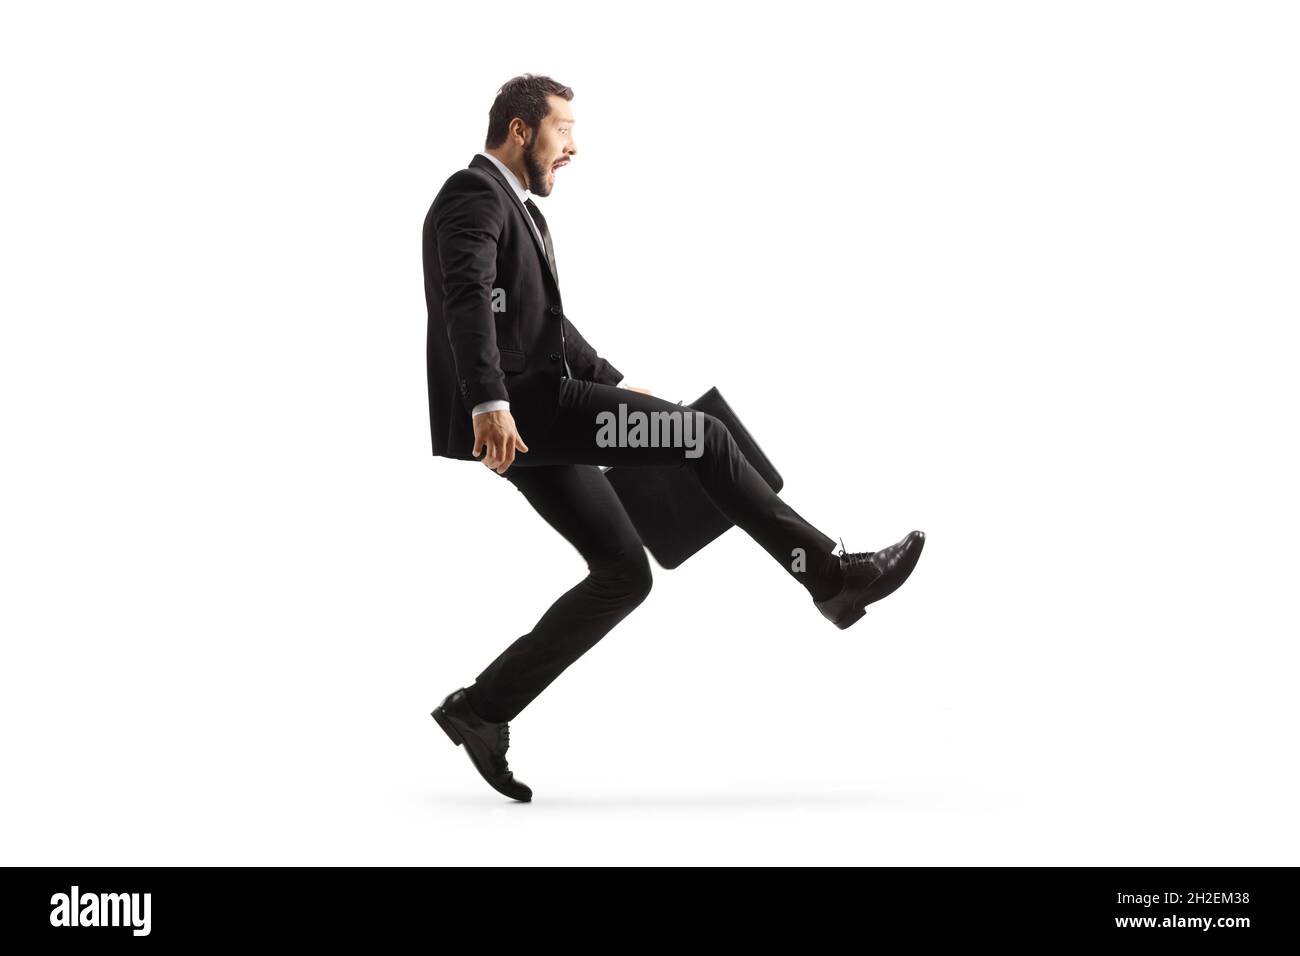 Full length profile shot of a businessman with a briefcase walking silly on tiptoes isolated on white background Stock Photo